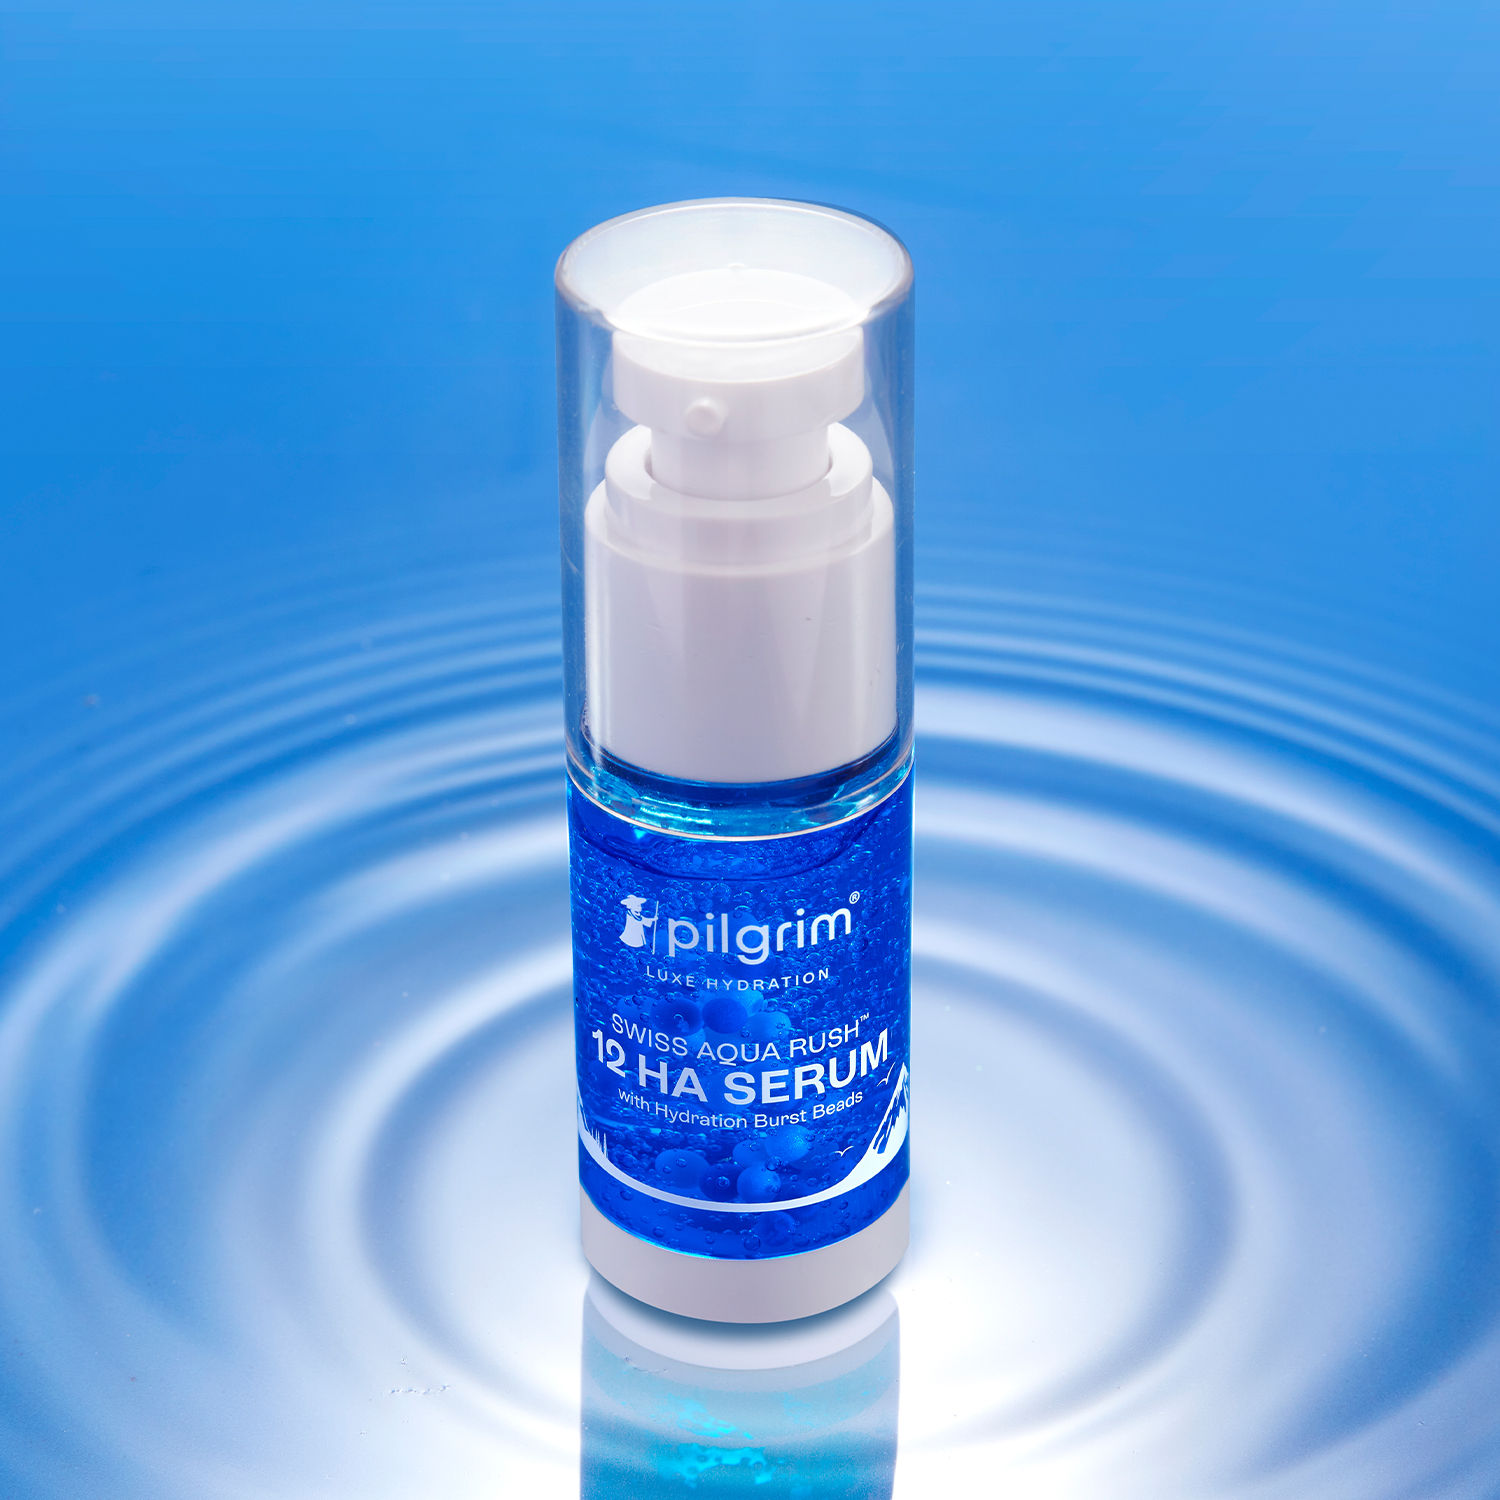 Buy Pilgrim Swiss Aqua Rush 12 HA Serum (hyaluronic acid) with Hydration Burst Beads |Crafted with Powerful Hydrators,12 hyaluronic acid, Copper Tripeptide |Long lasting Hydration| 30ml - Purplle